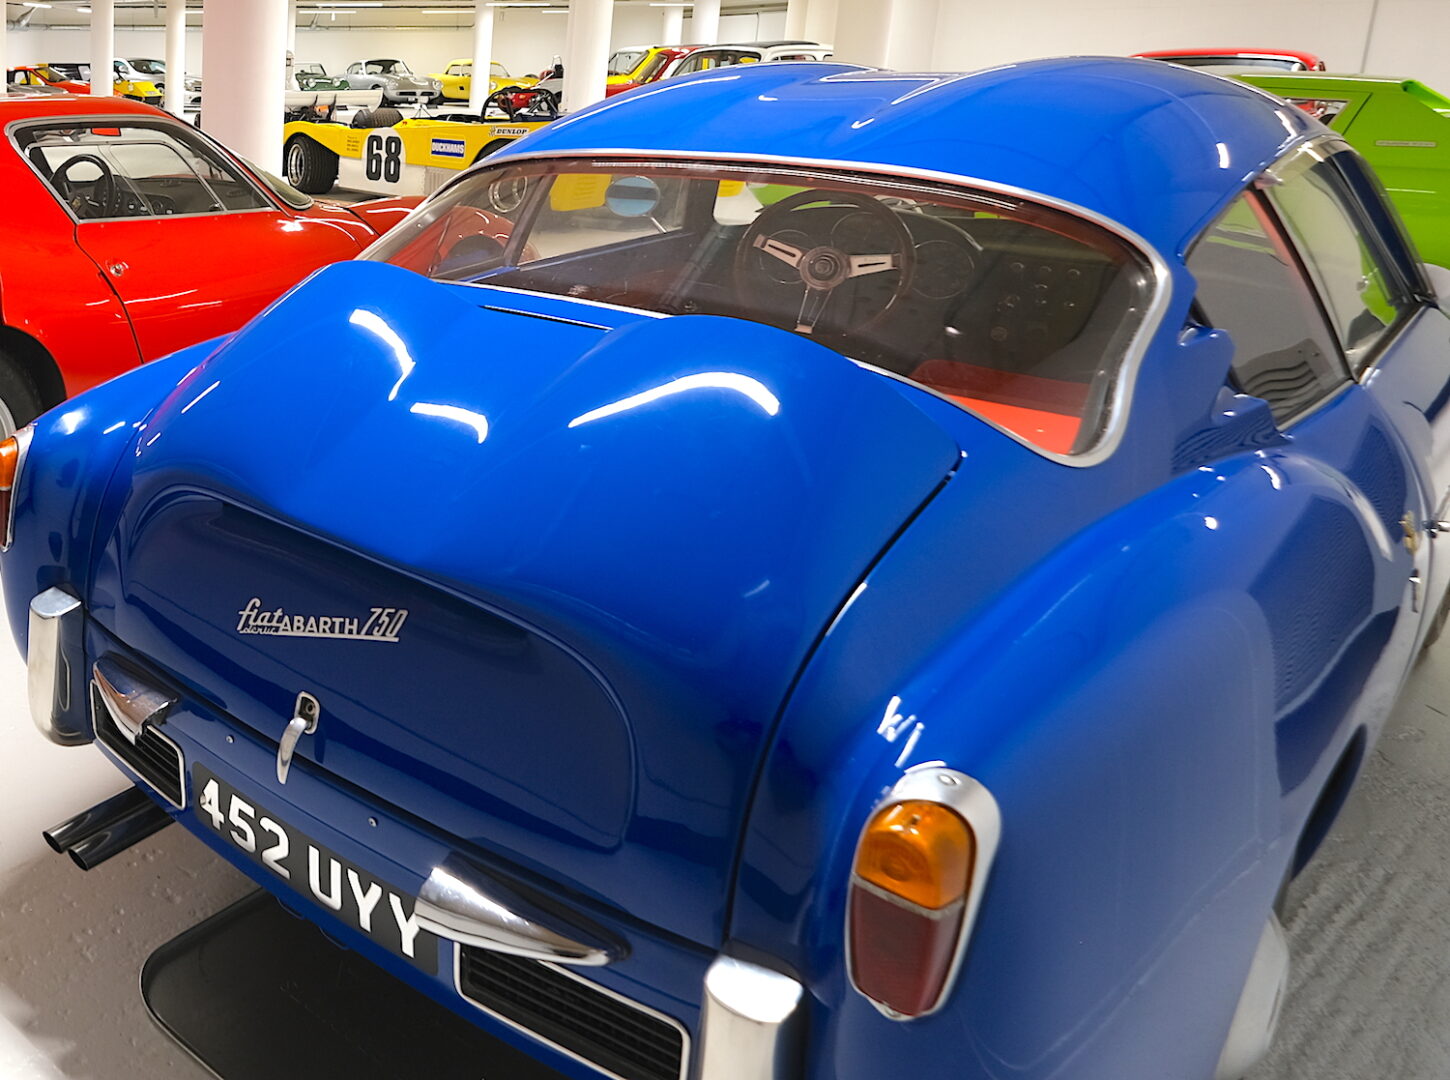 Storing your classic car